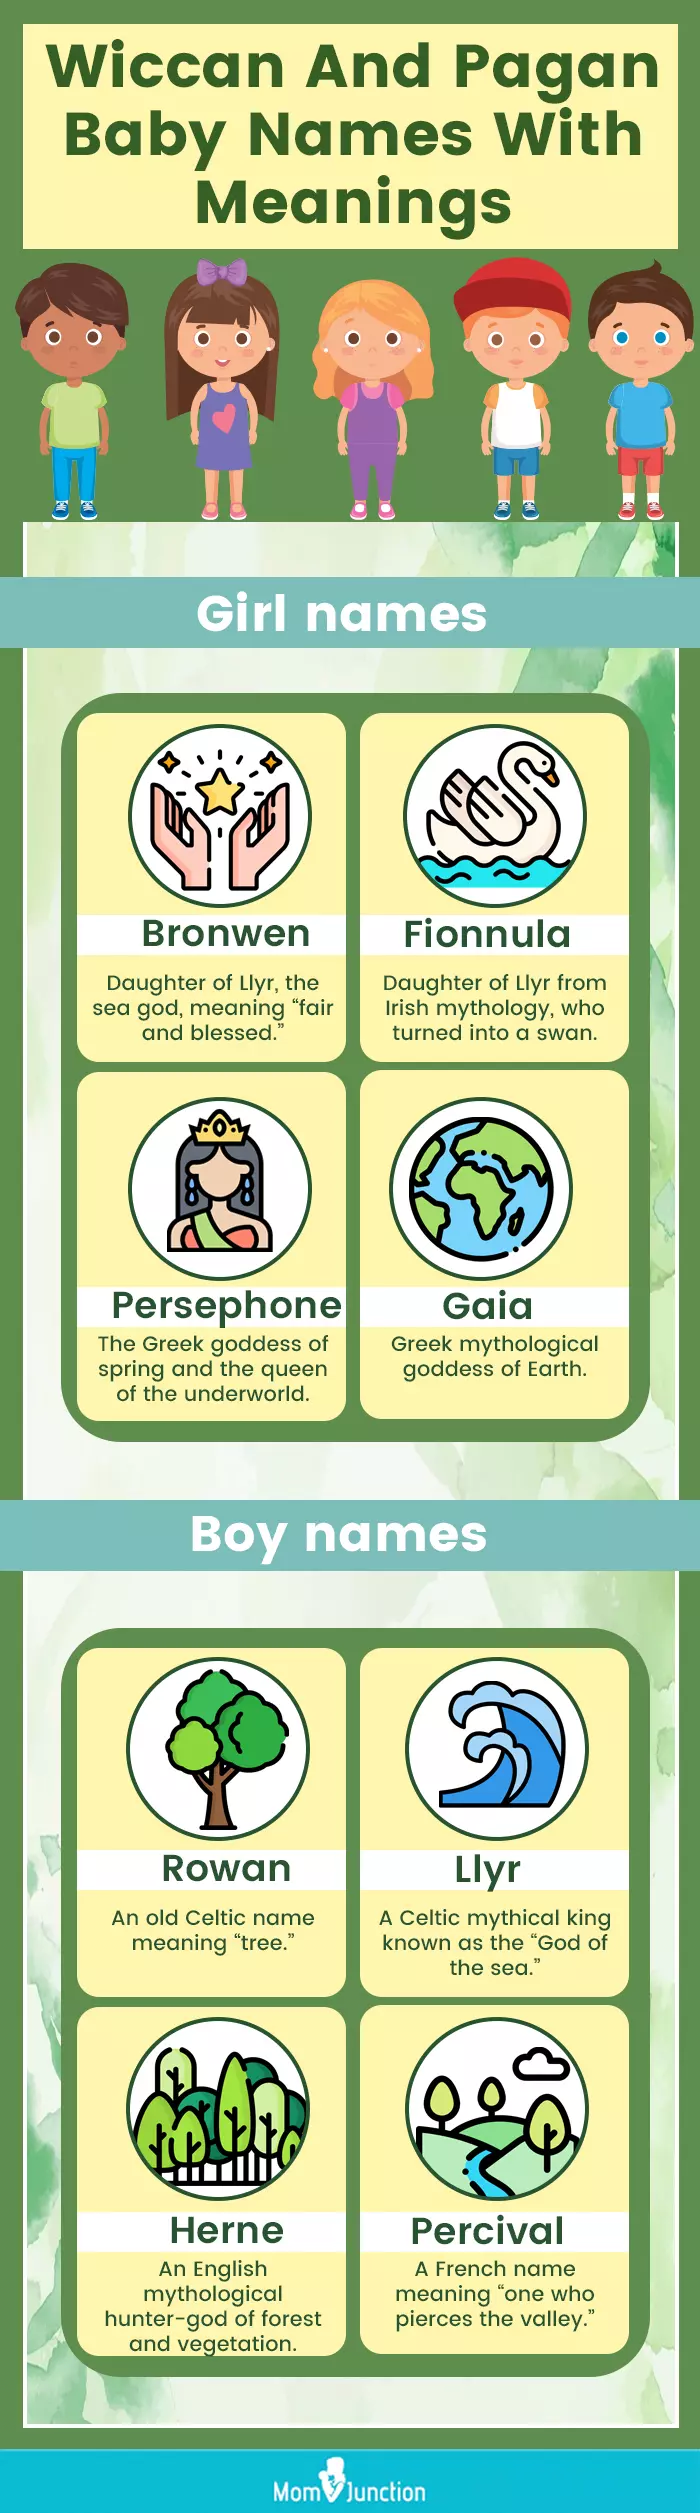 wiccan and pagan baby names with meanings (infographic)